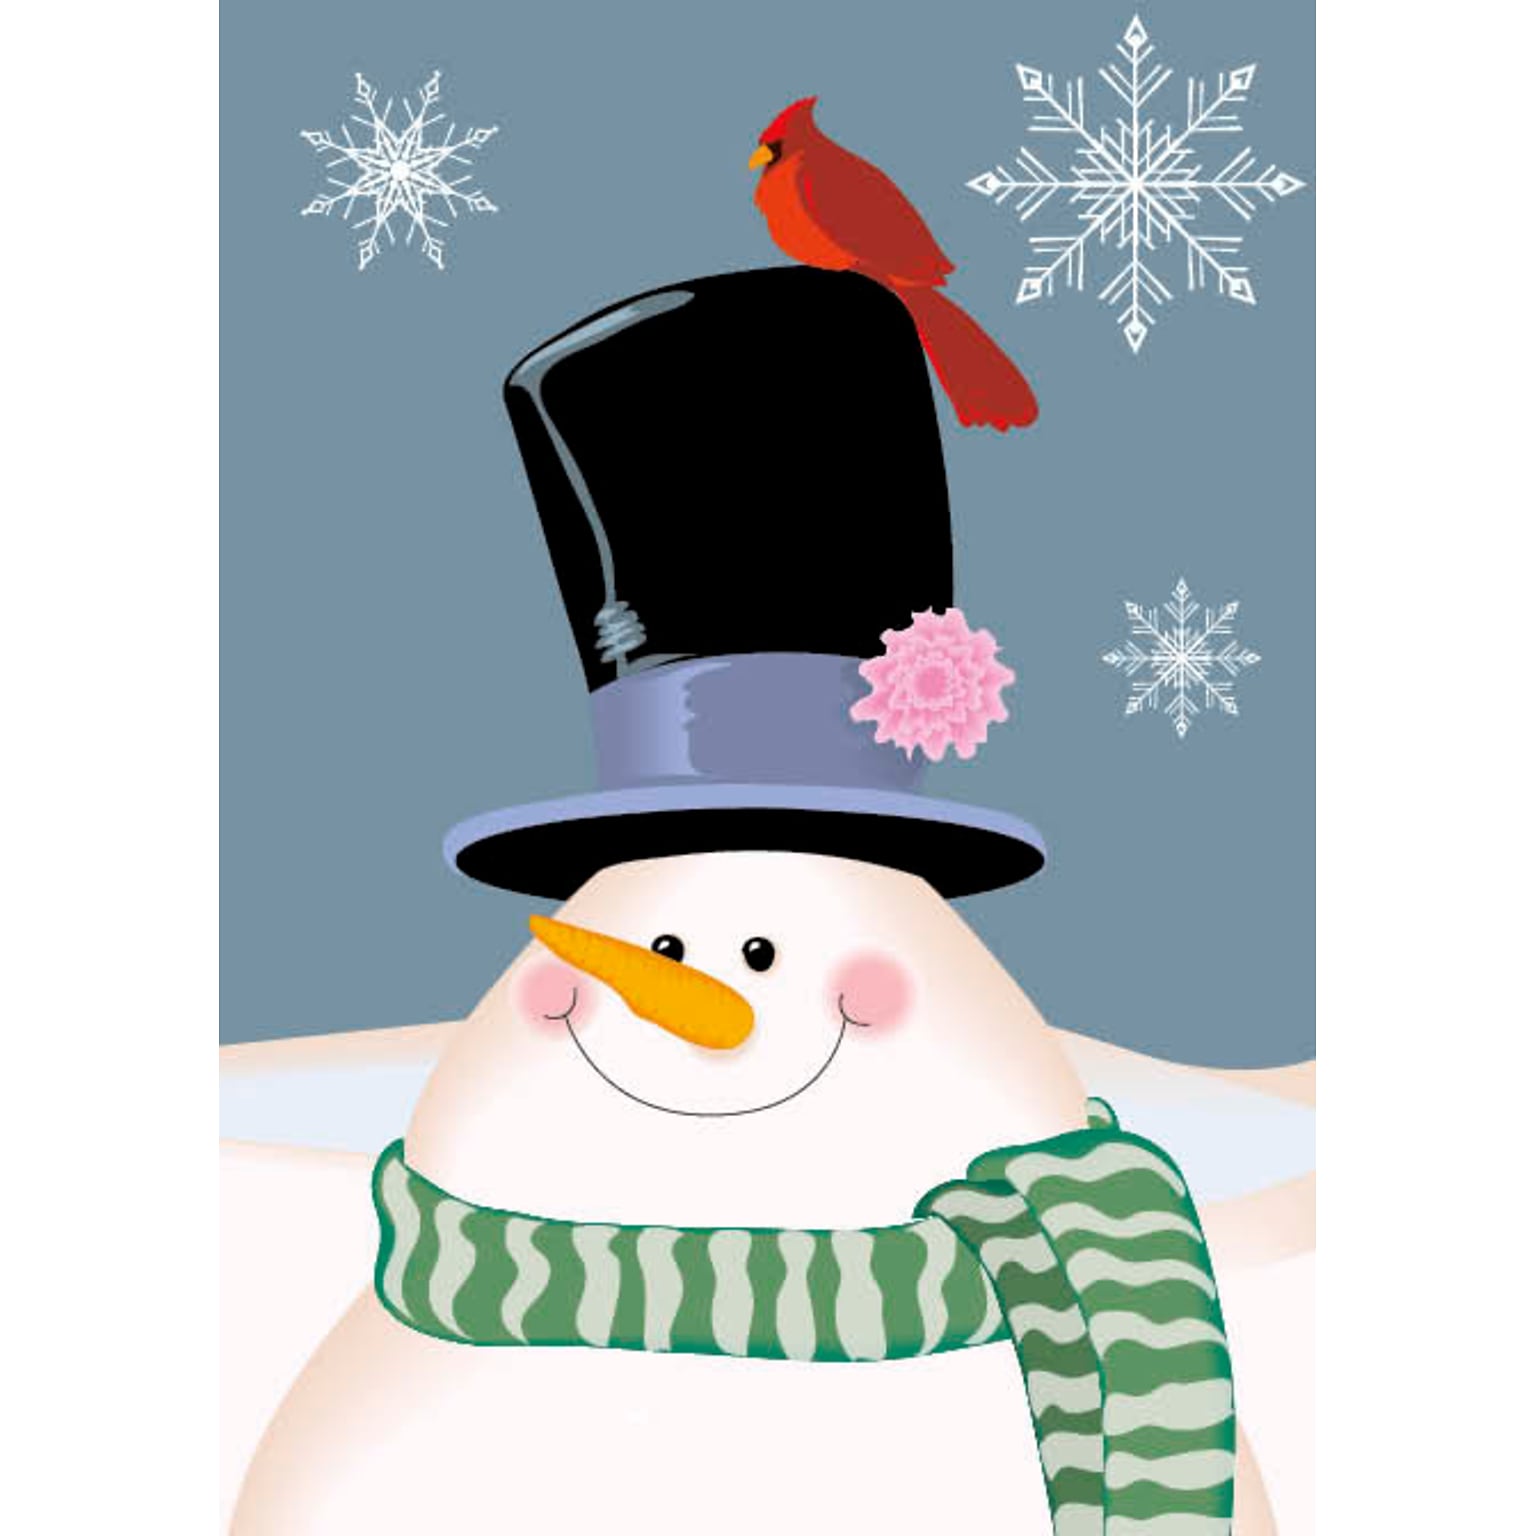 Snowman With Cardinal On Hat Holiday Greeting Cards, With A7 Envelopes, 7 x 5, 25 Cards per Set